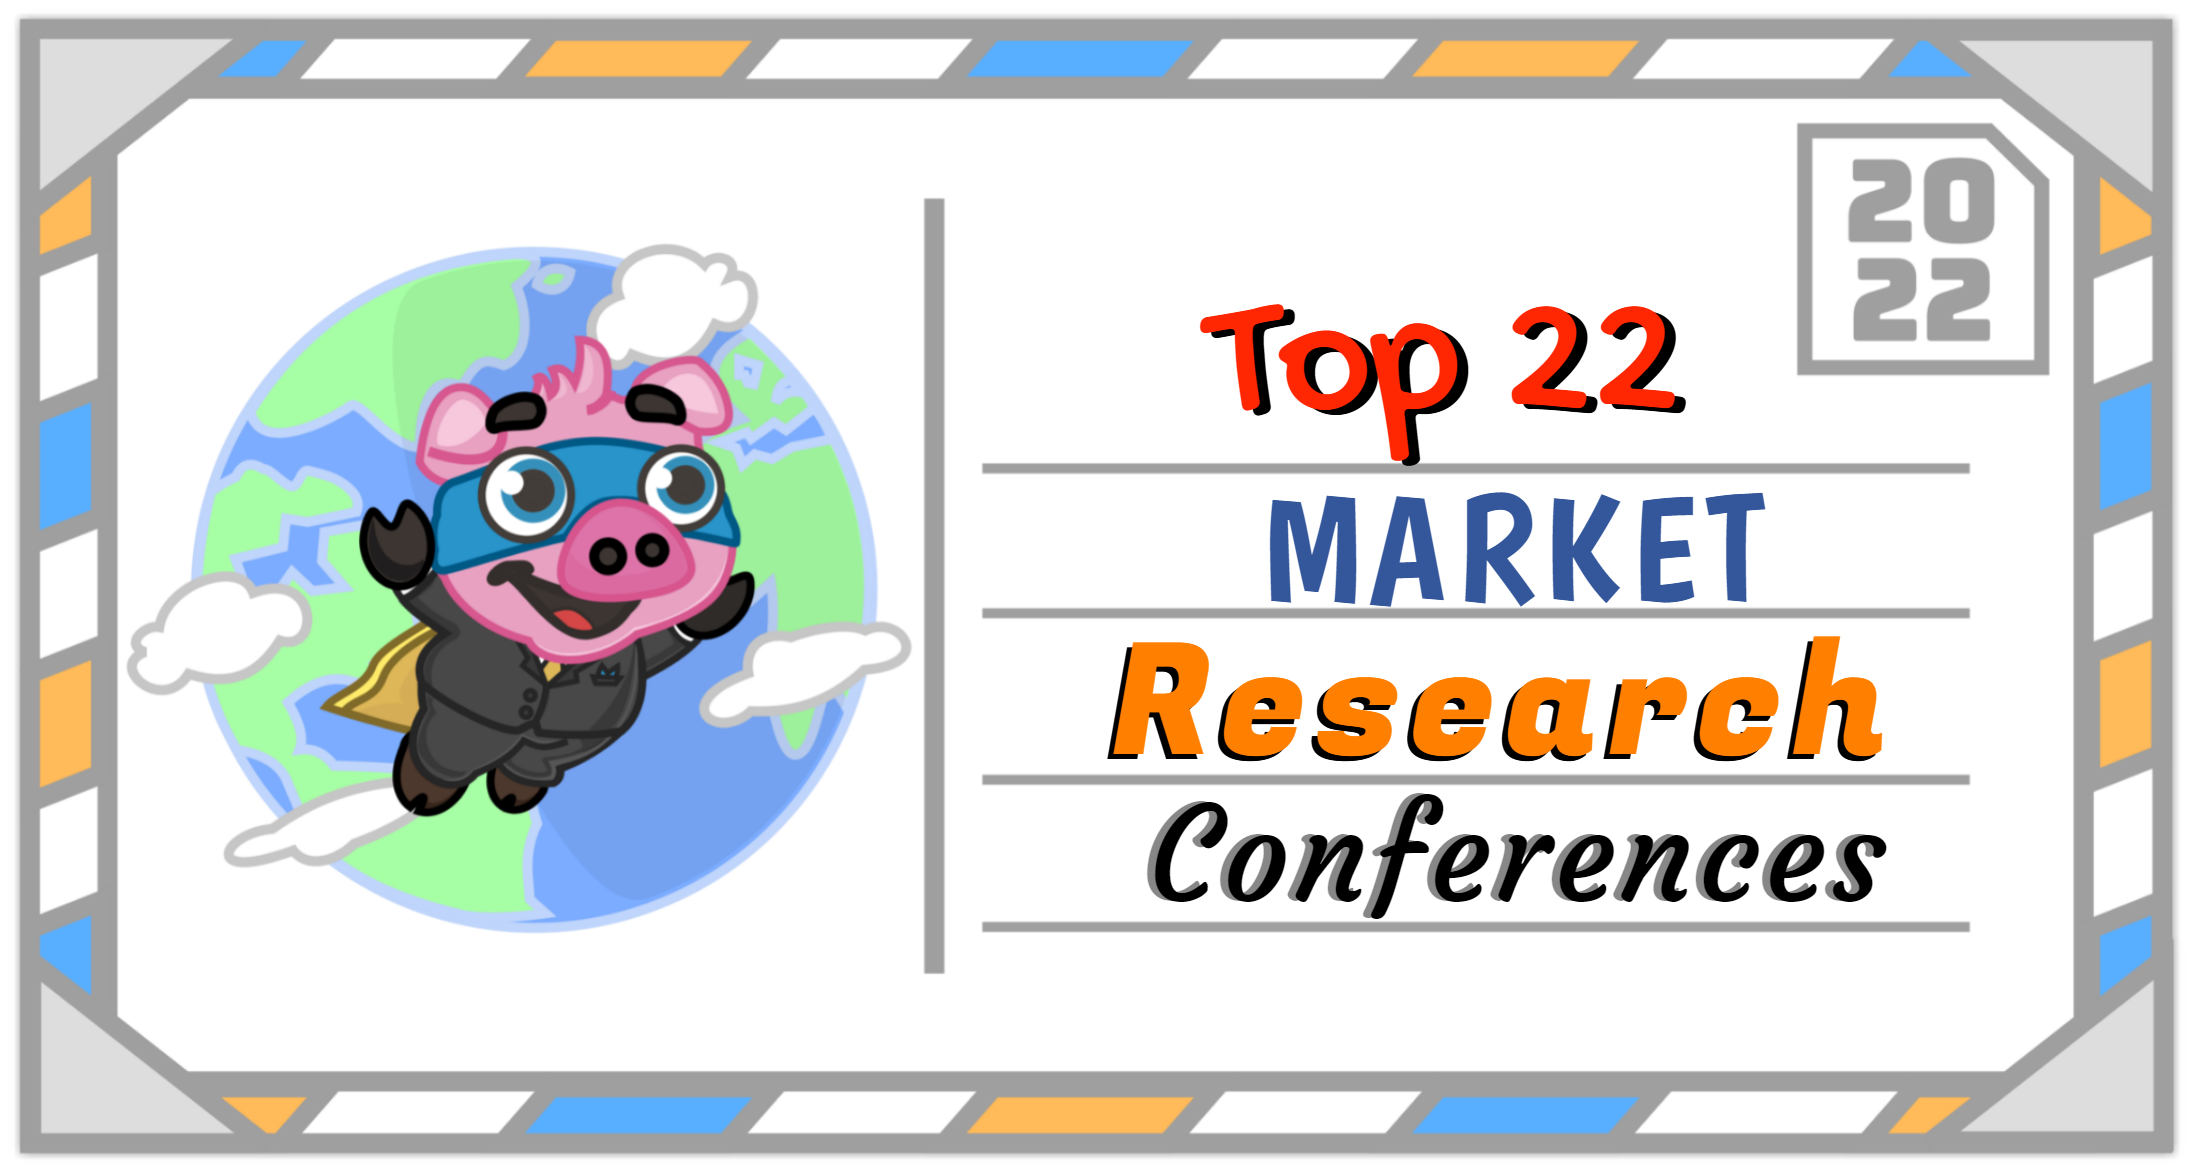 The Top 22 Market Research Conferences to Attend in 2022